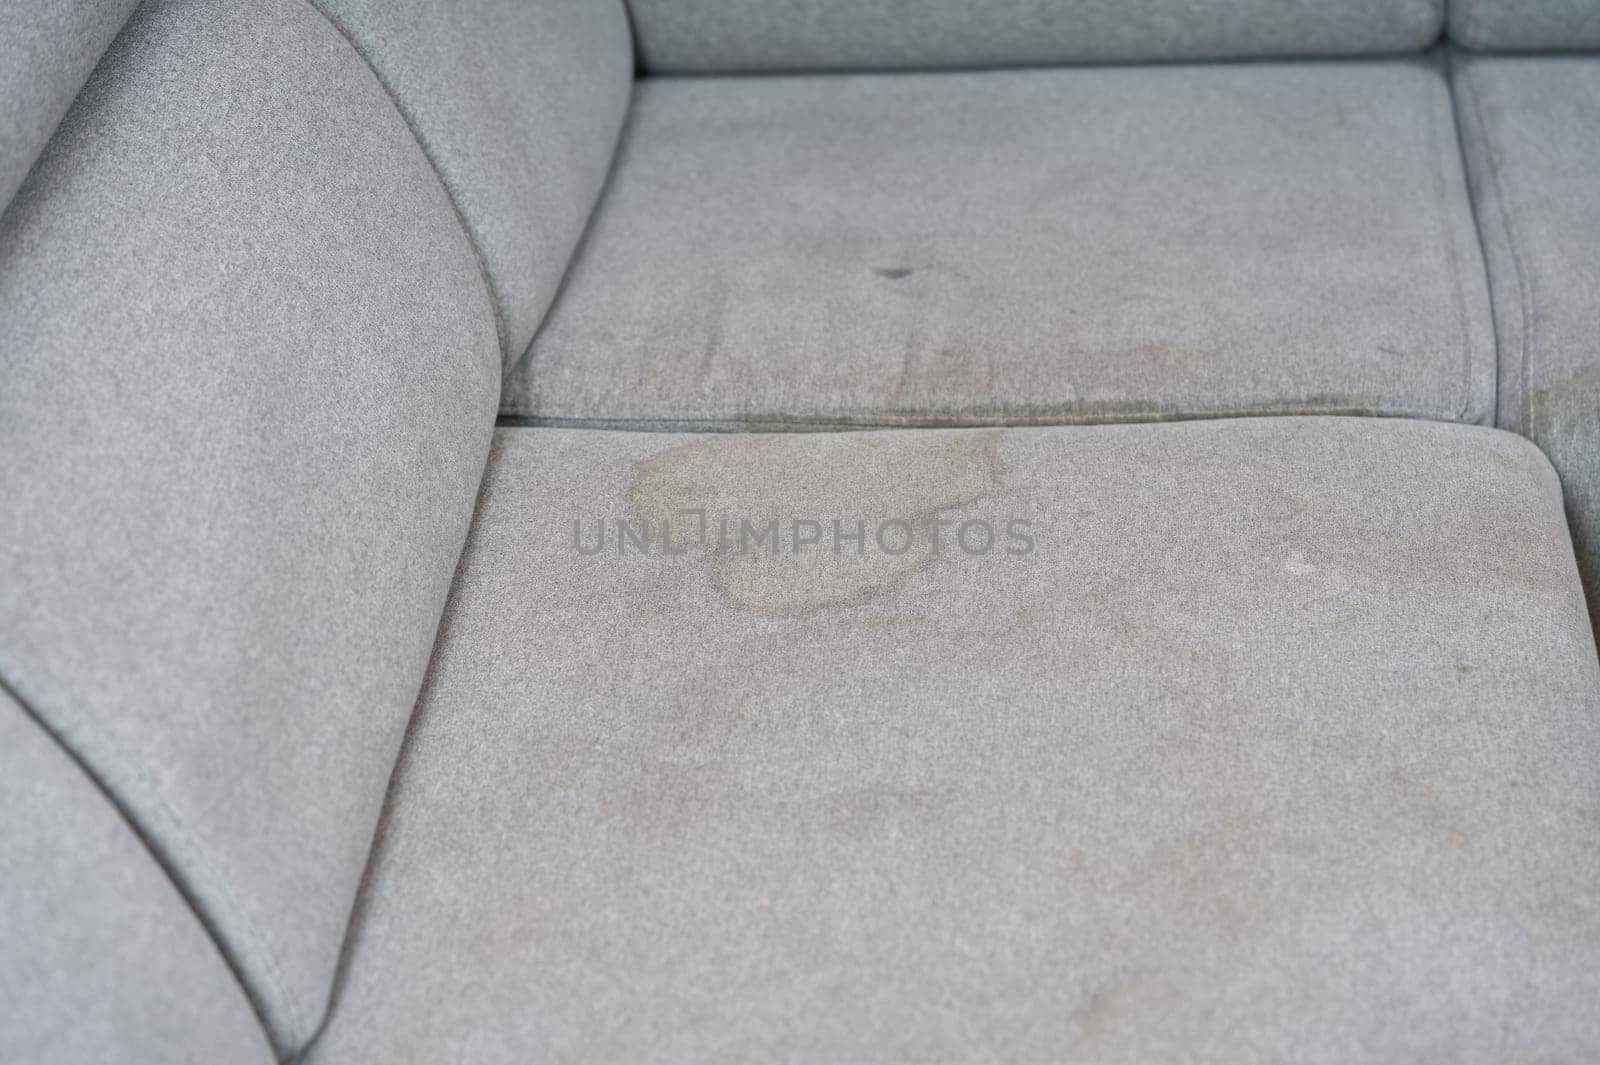 Dirty, stain, blot, fleck of water on the fabric, textile sofa. Dirty textile sofa chemical cleaning by PhotoTime